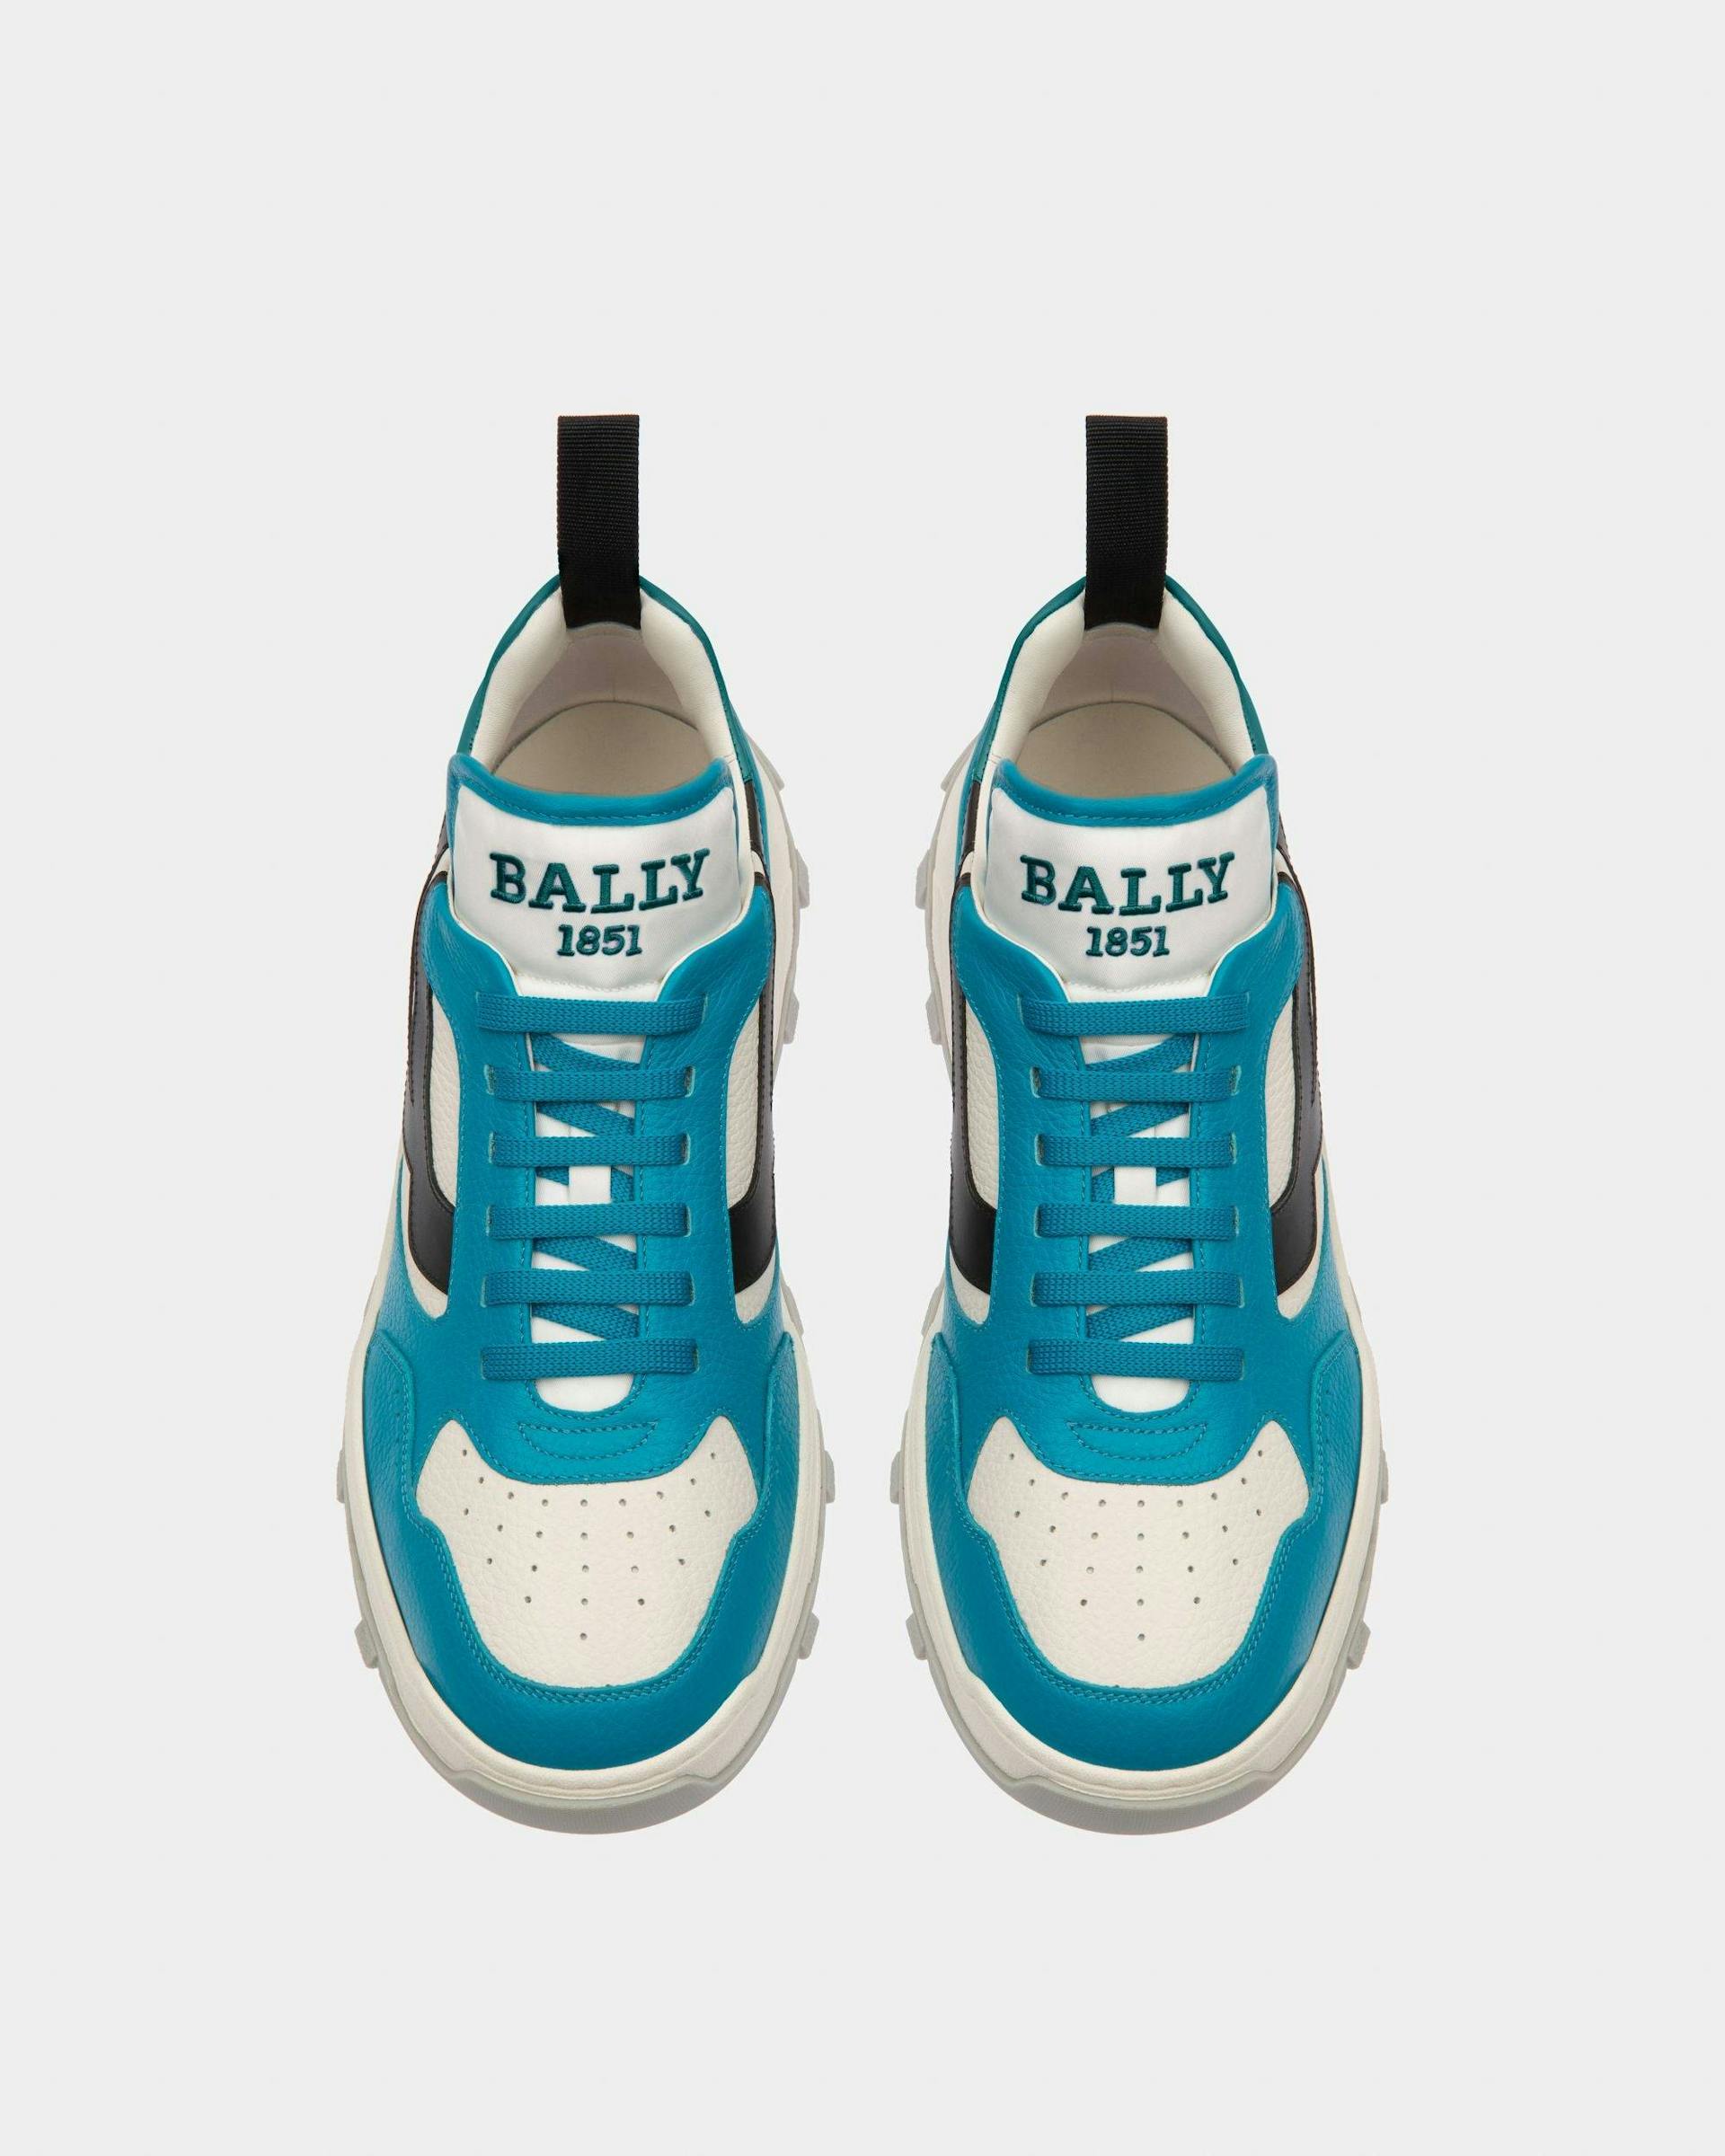 Holden Leather And Fabric Sneakers In Blue And White - Men's - Bally - 02